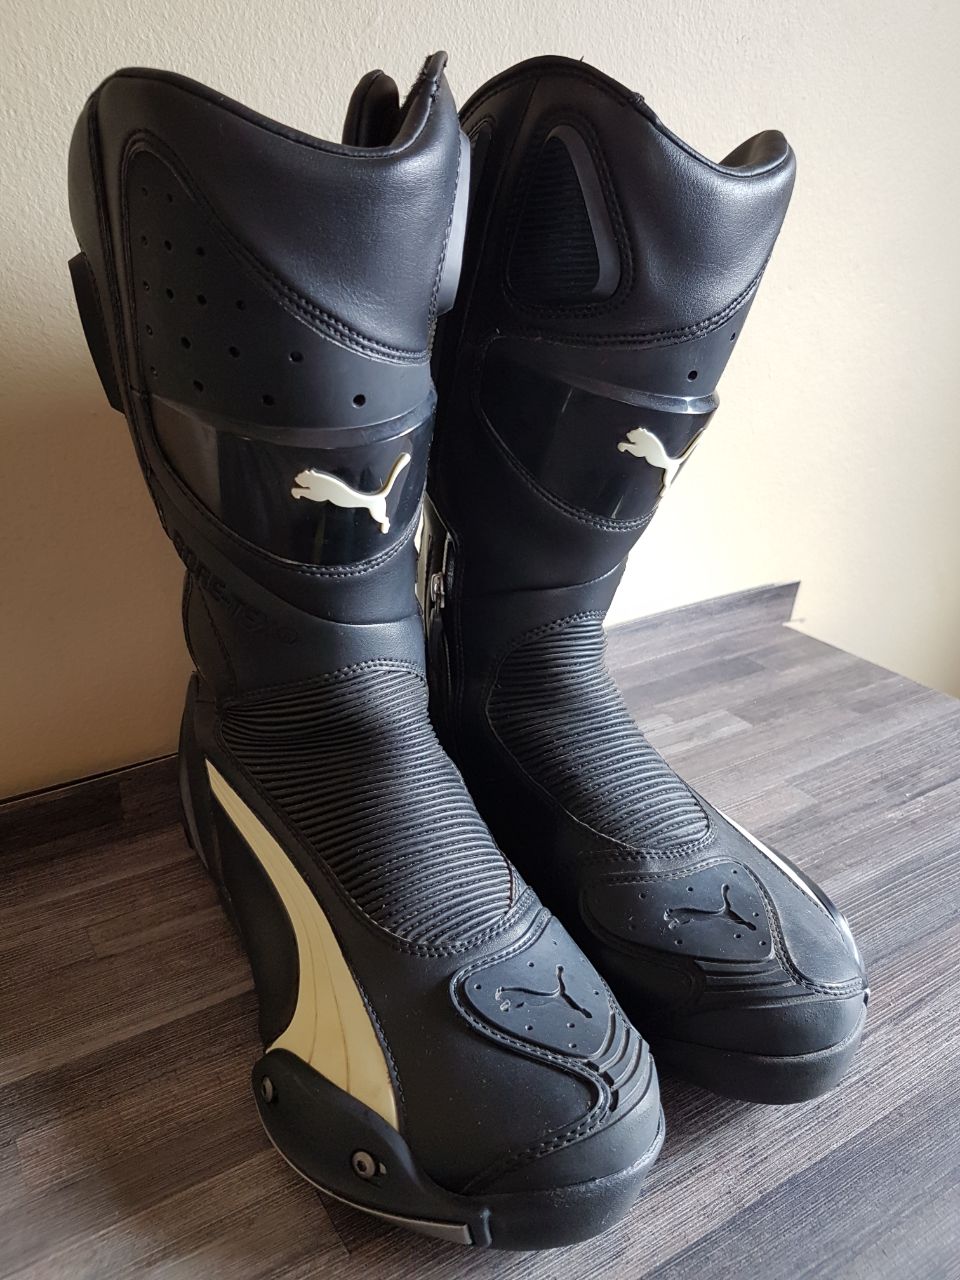 Puma Gore-tex motorcycle riding boots | Junk Mail